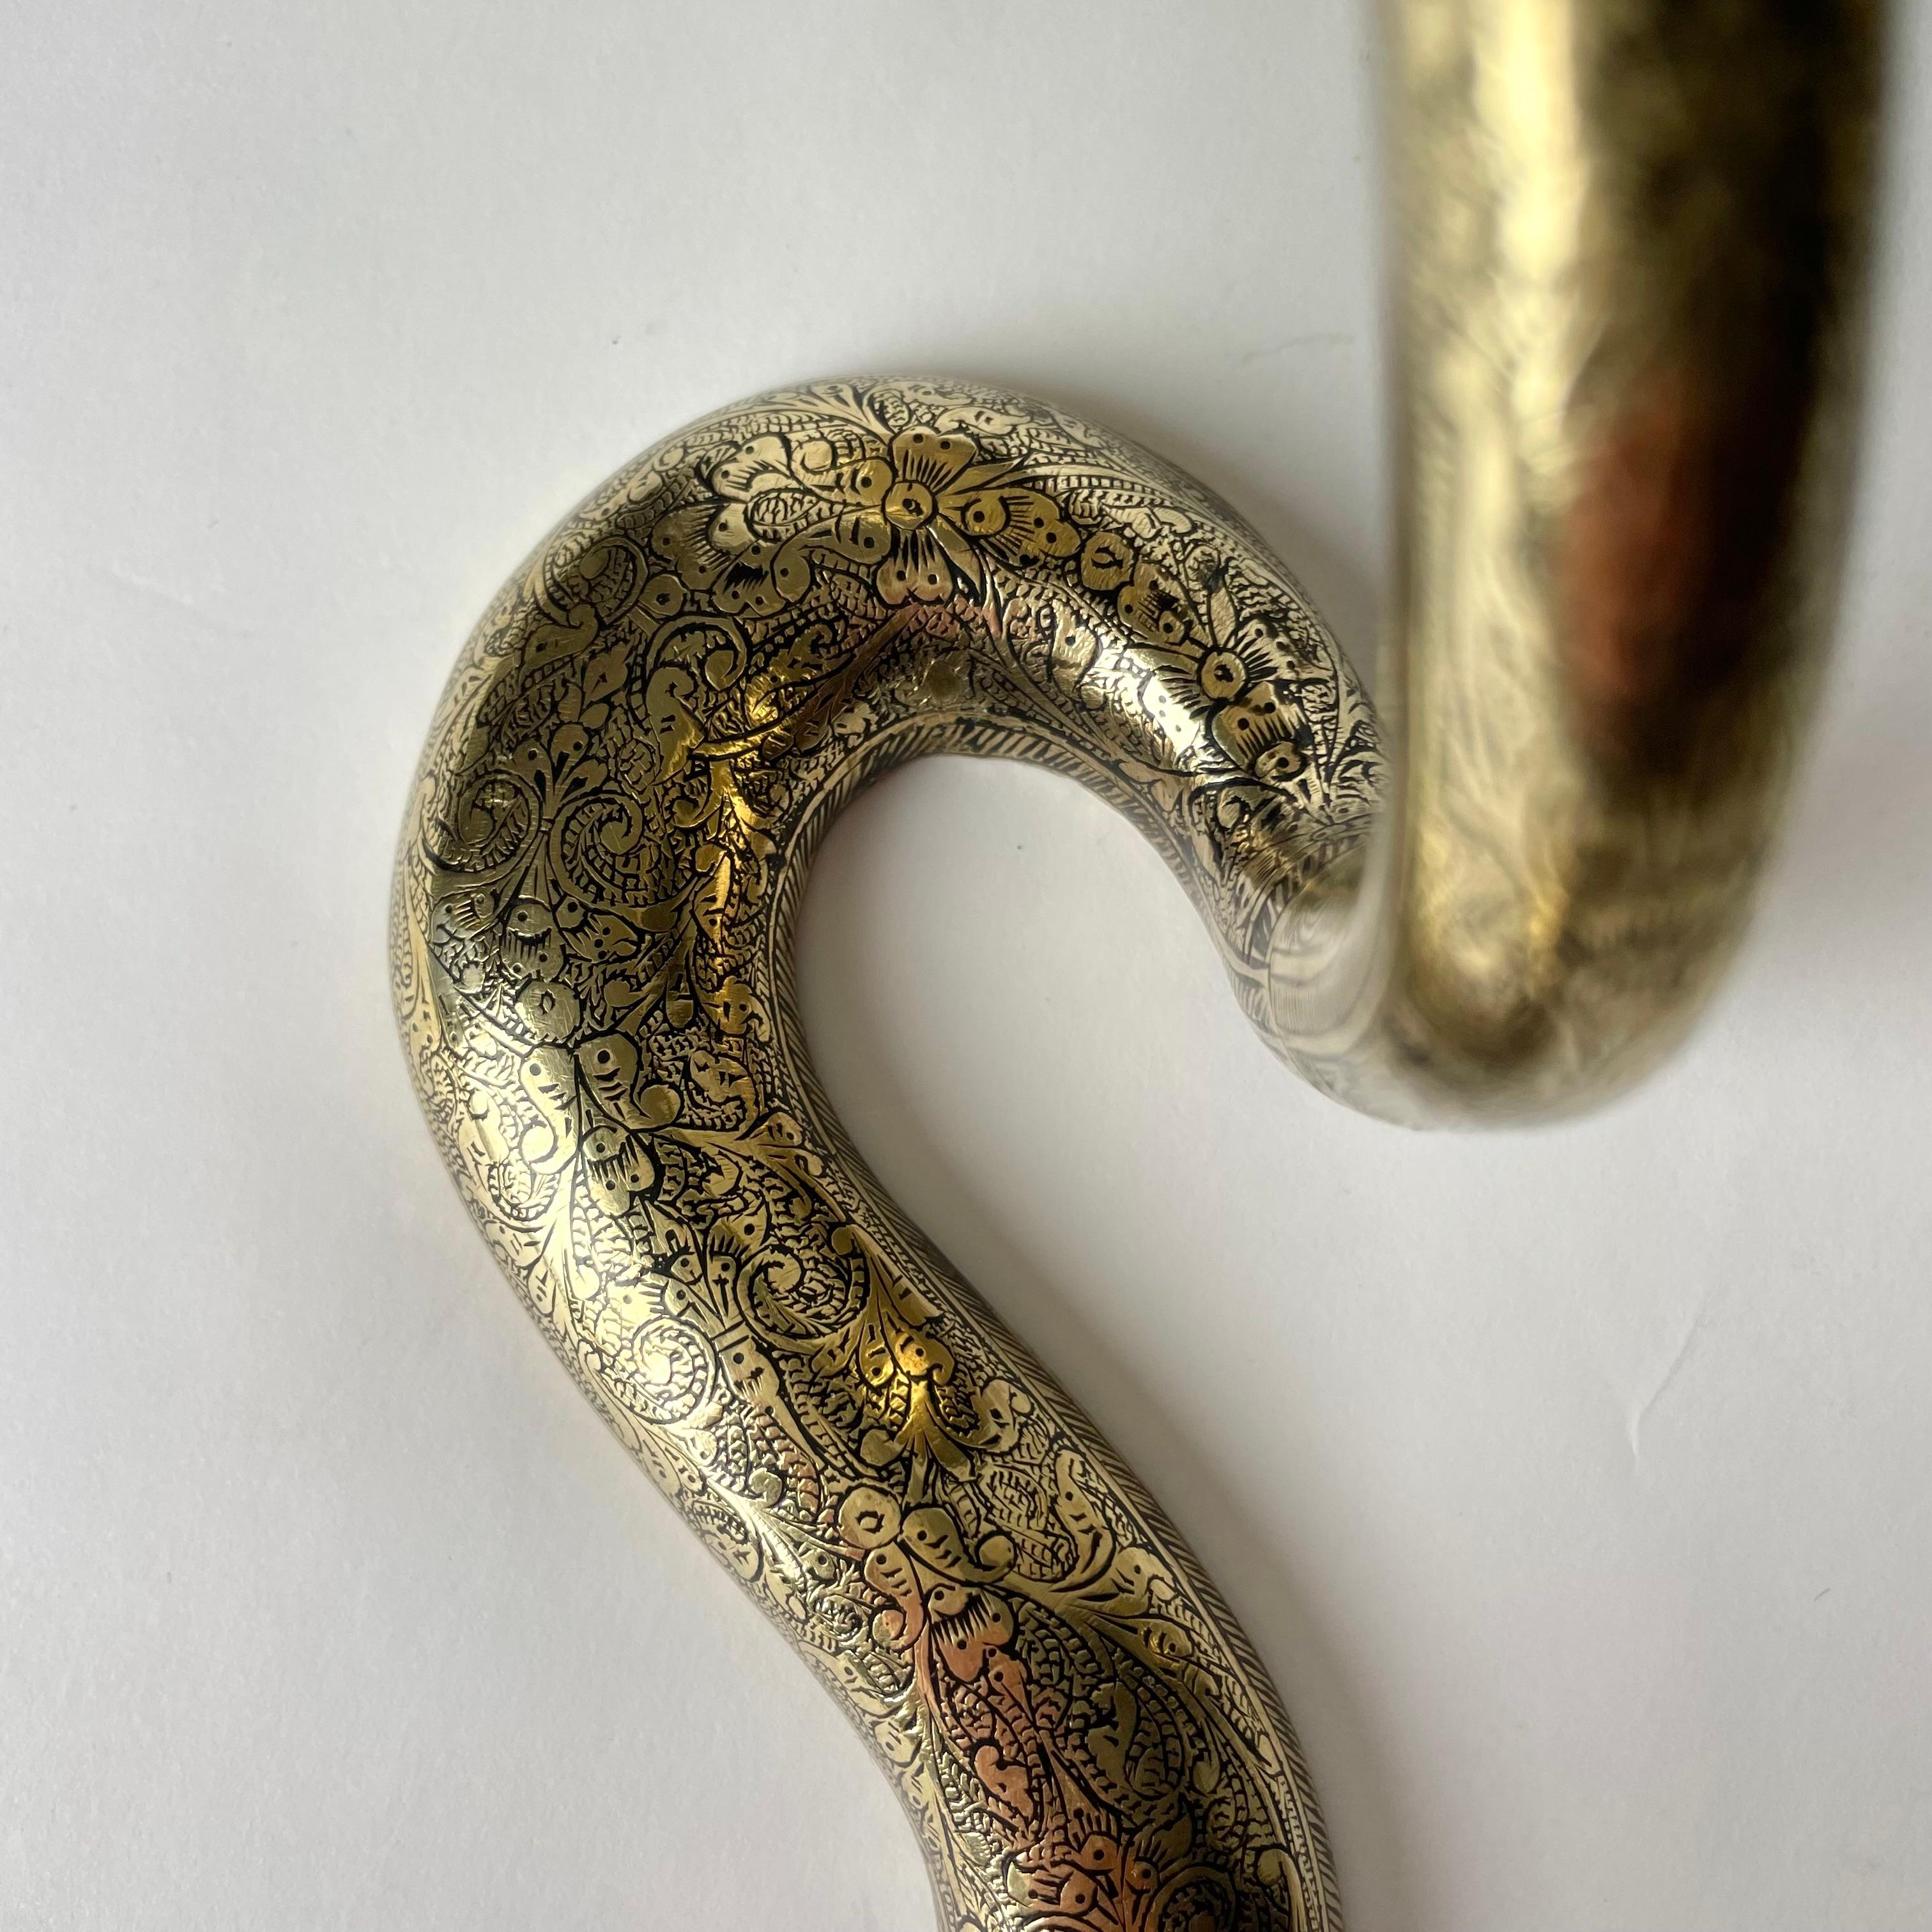 Pair of Wall Lights  in the Shape of a Cobra, Art Deco, 1920s-1930s For Sale 4